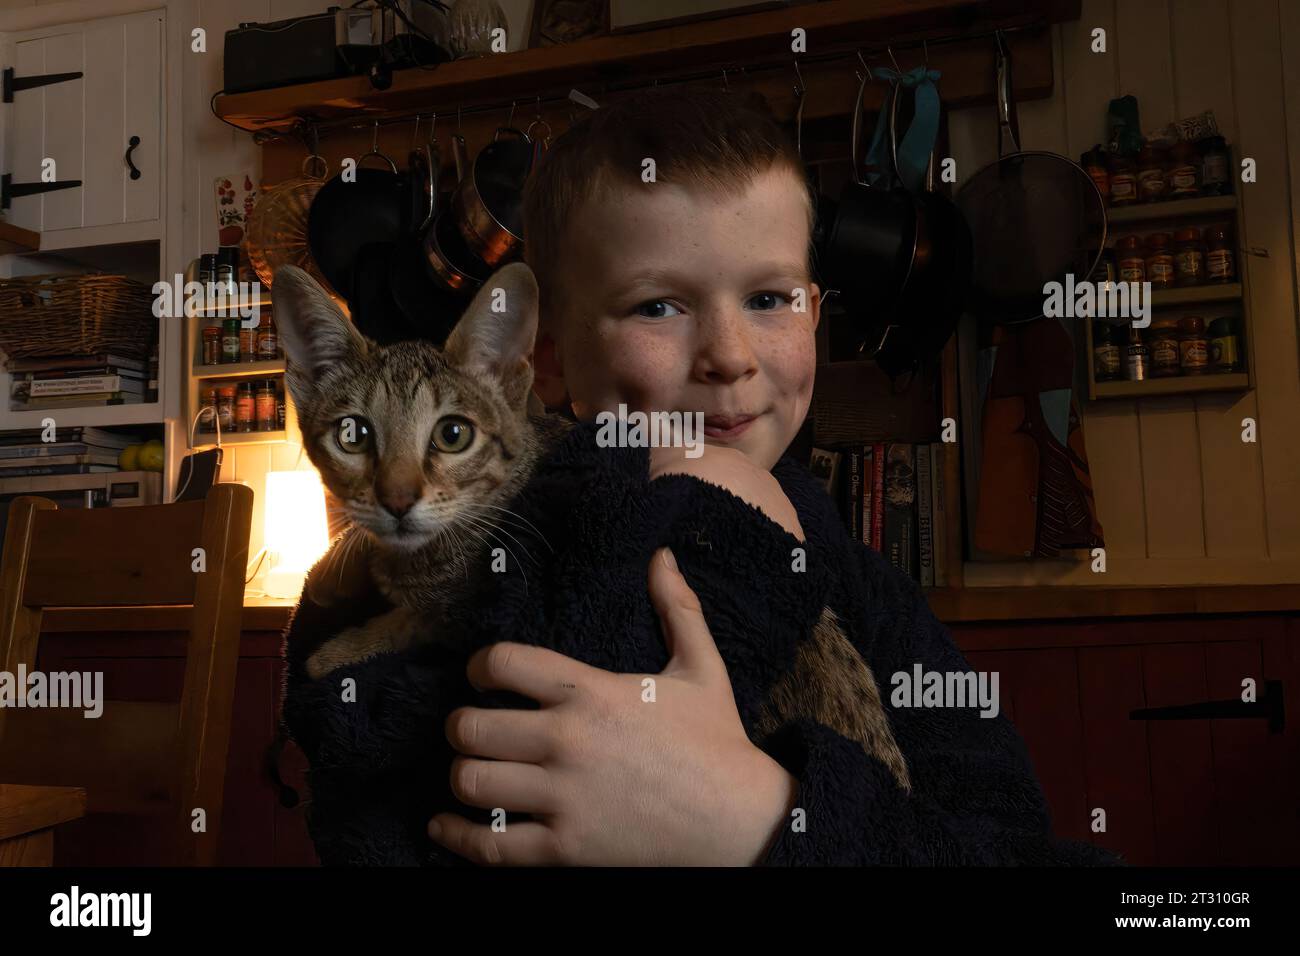 7-year-old boy holding his pet cat (an exotic Savannah breed) at his home in the UK. Stock Photo